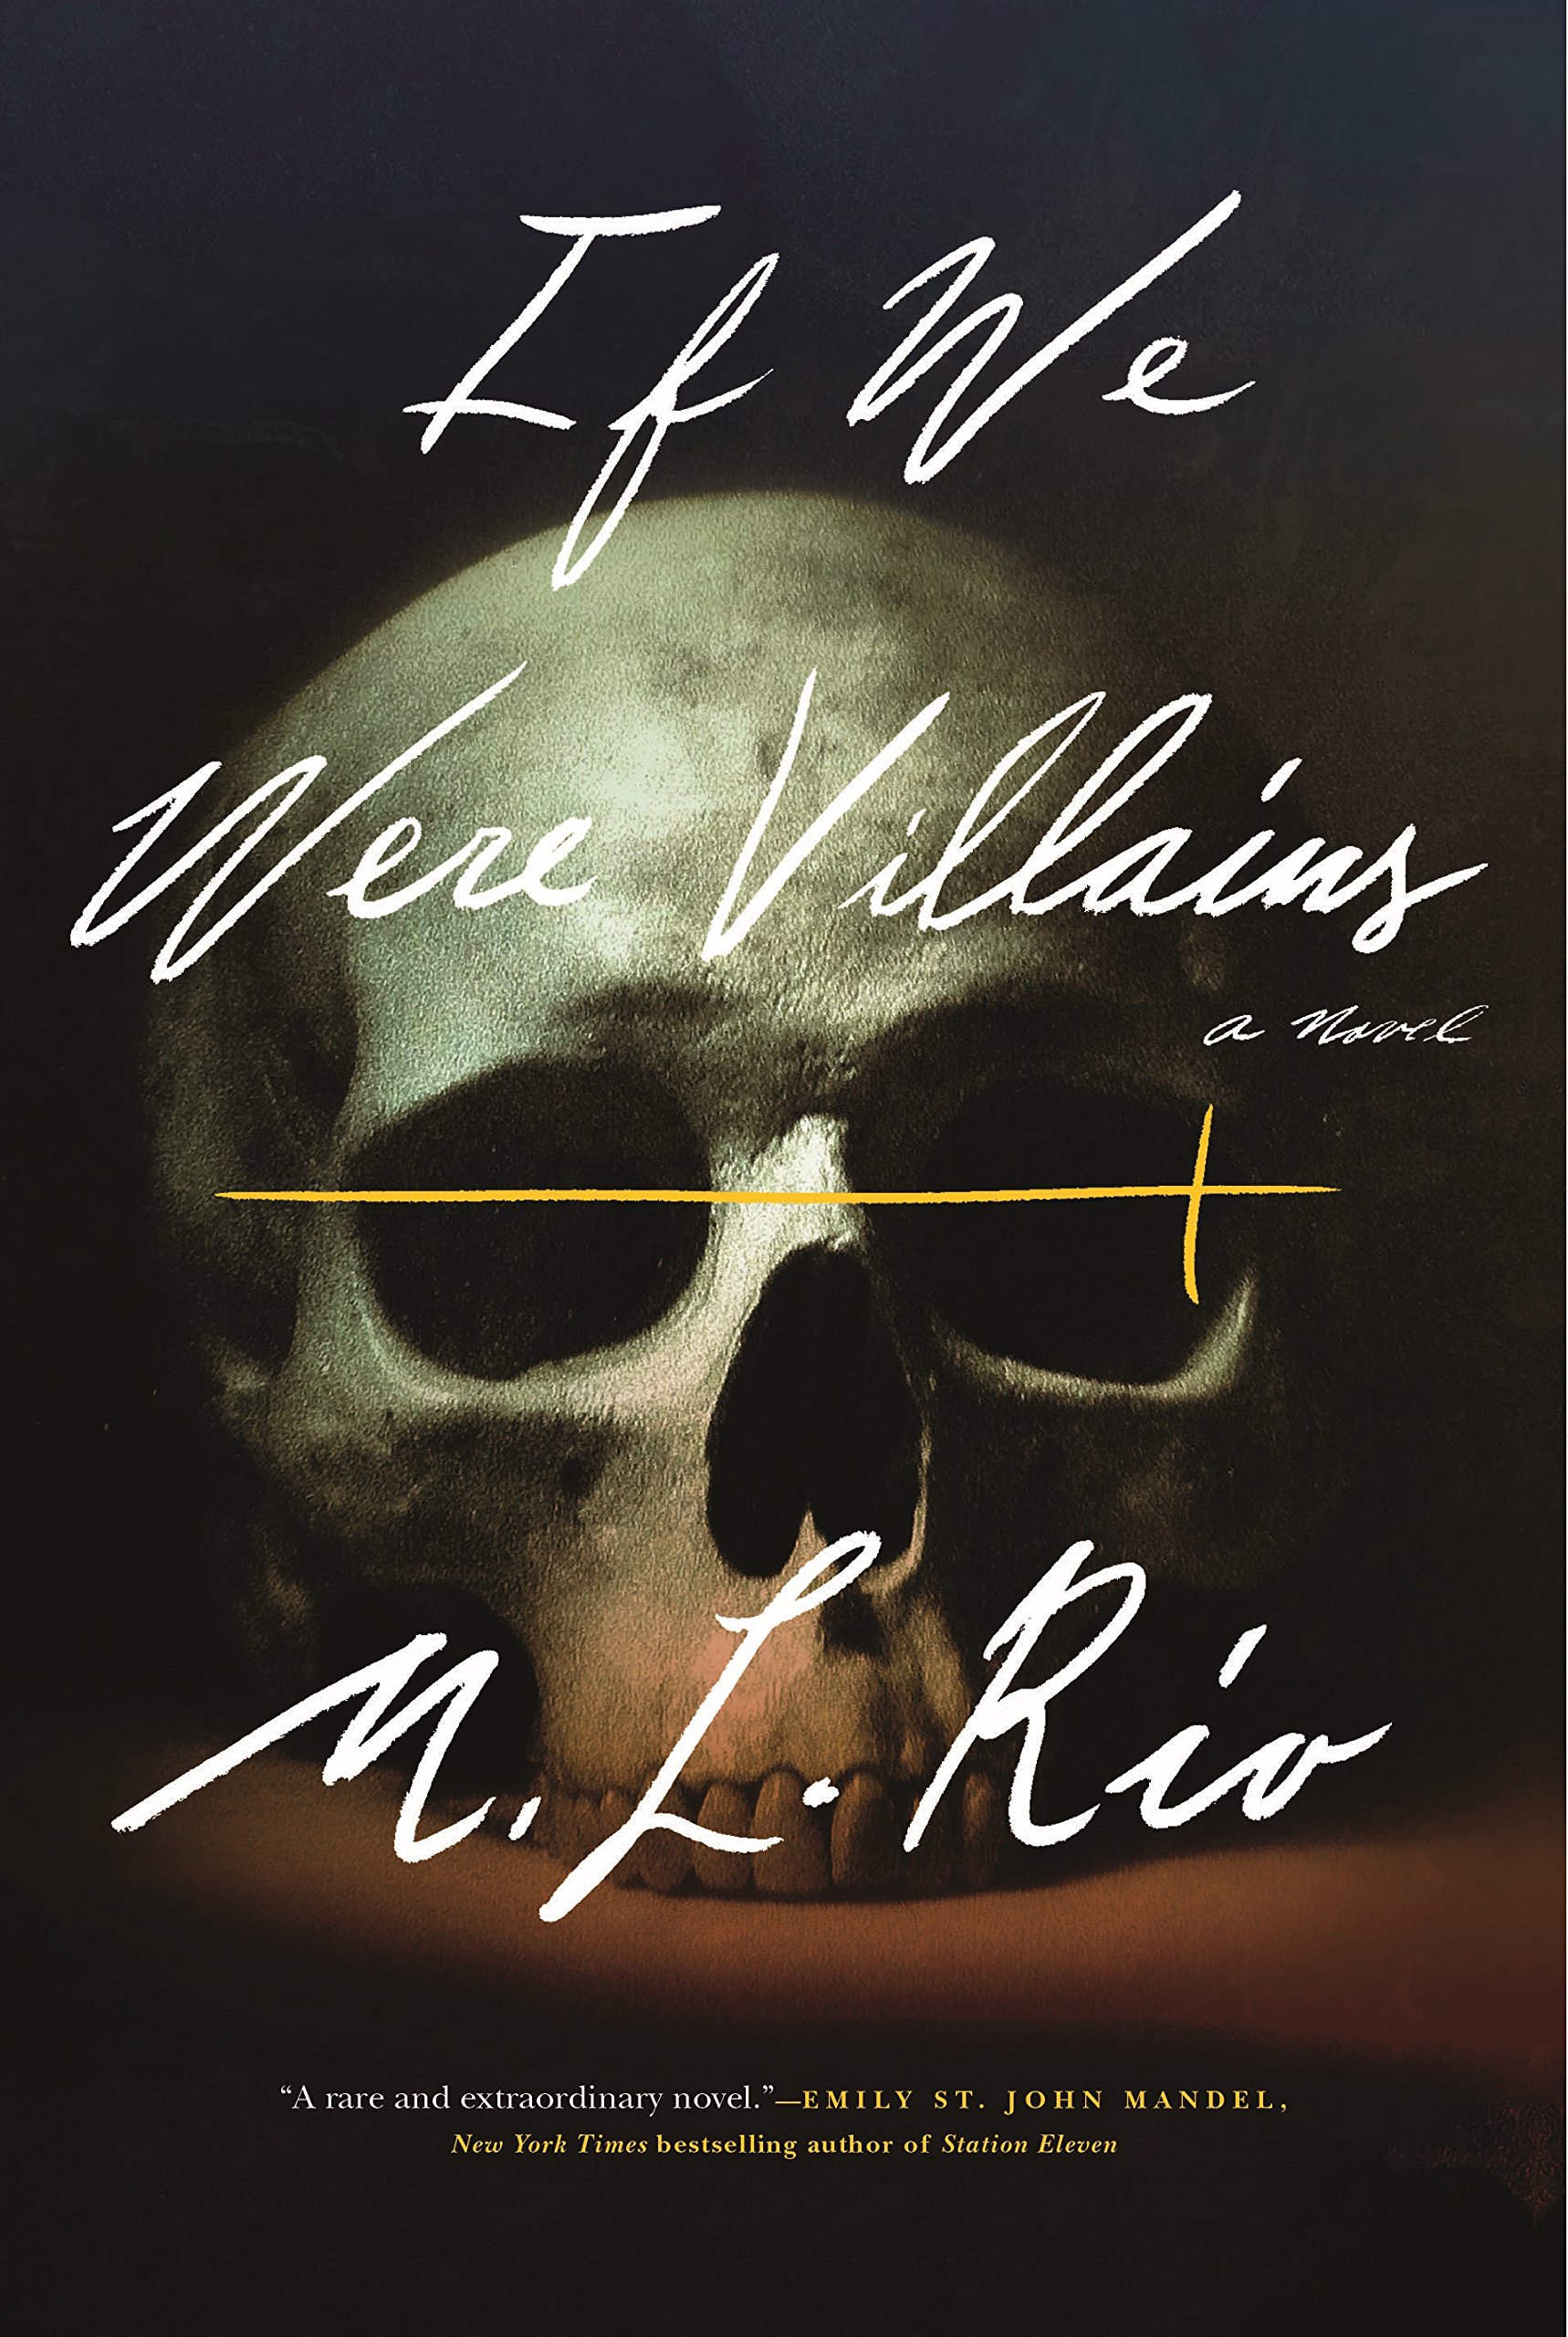 The cover of If We Were Villains by M. L. Rio